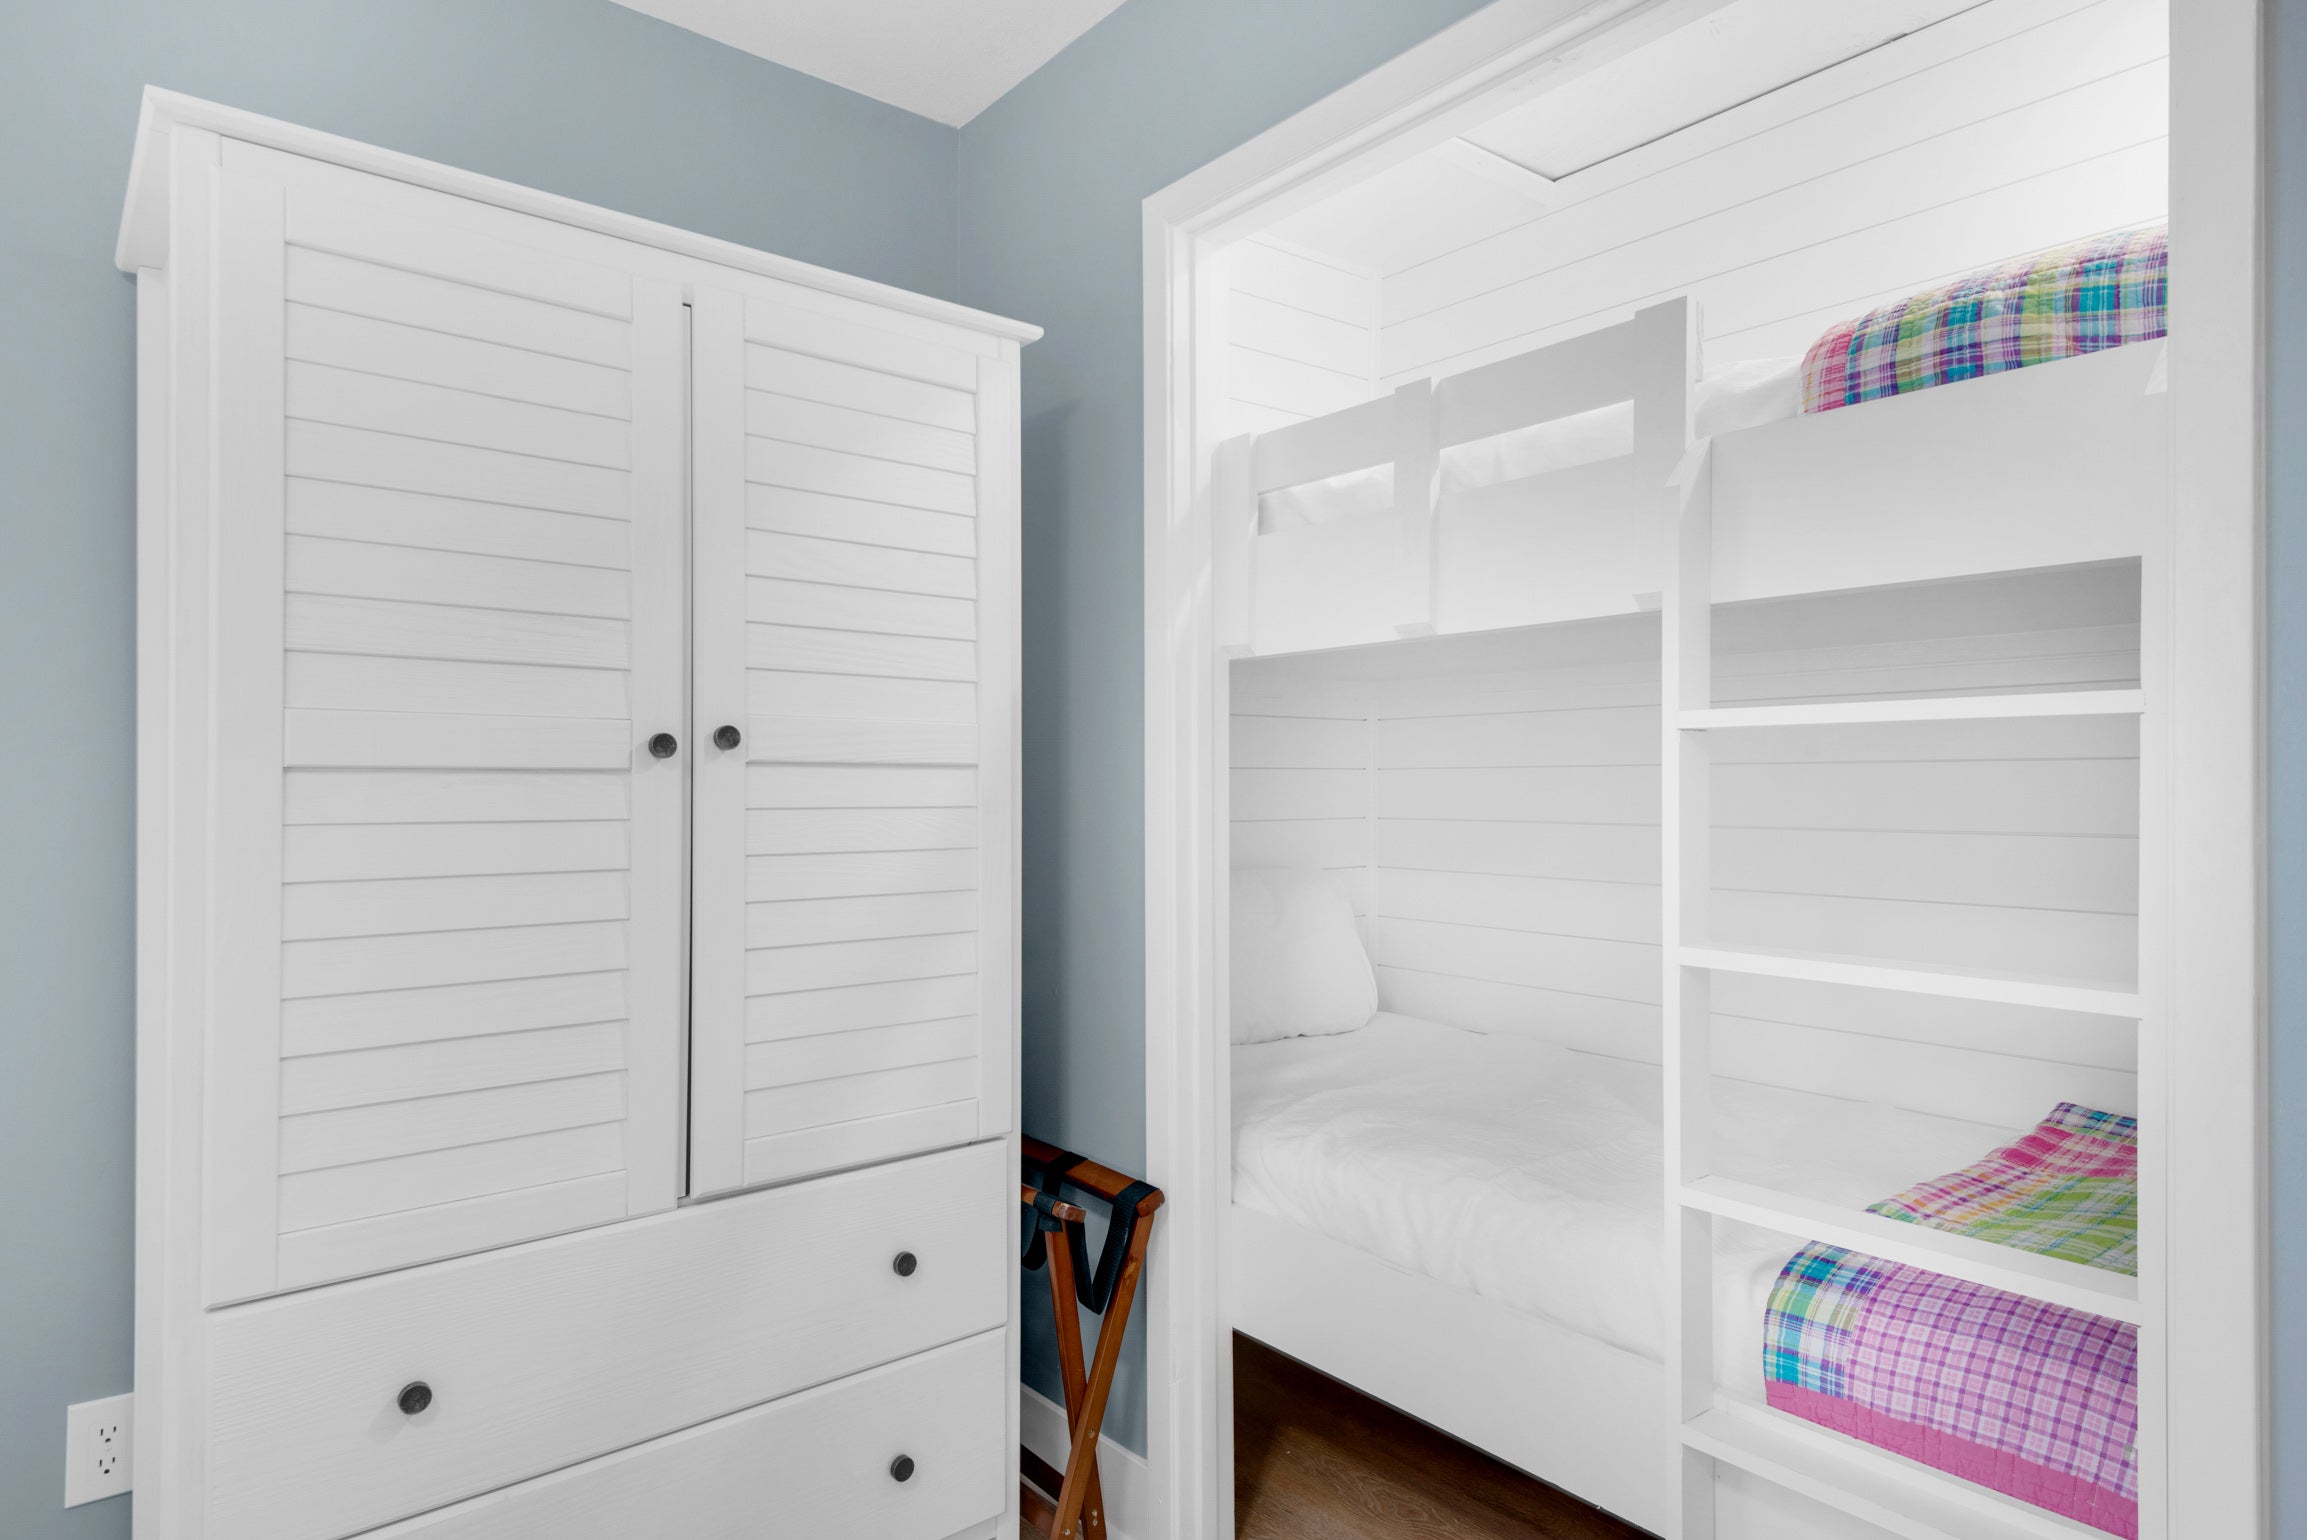 Bunk beds in the closet